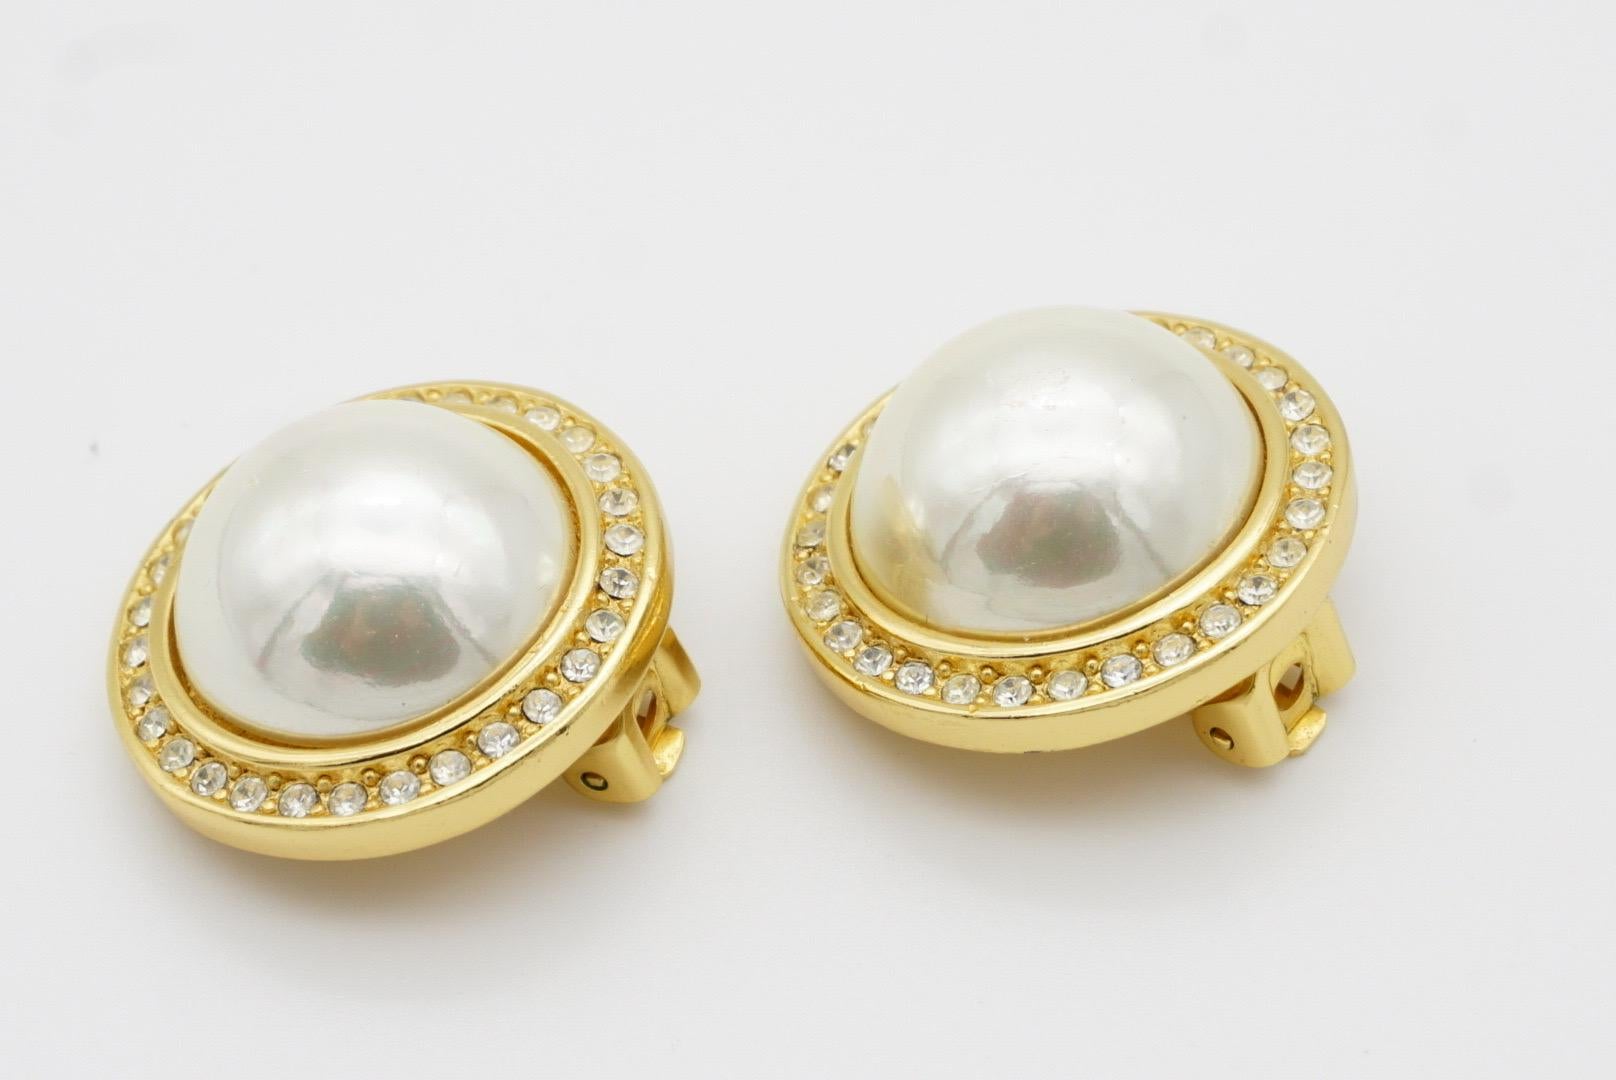 Christian Dior GROSSE 1990 CHC Large Round White Pearl Crystals Clip Earrings For Sale 4